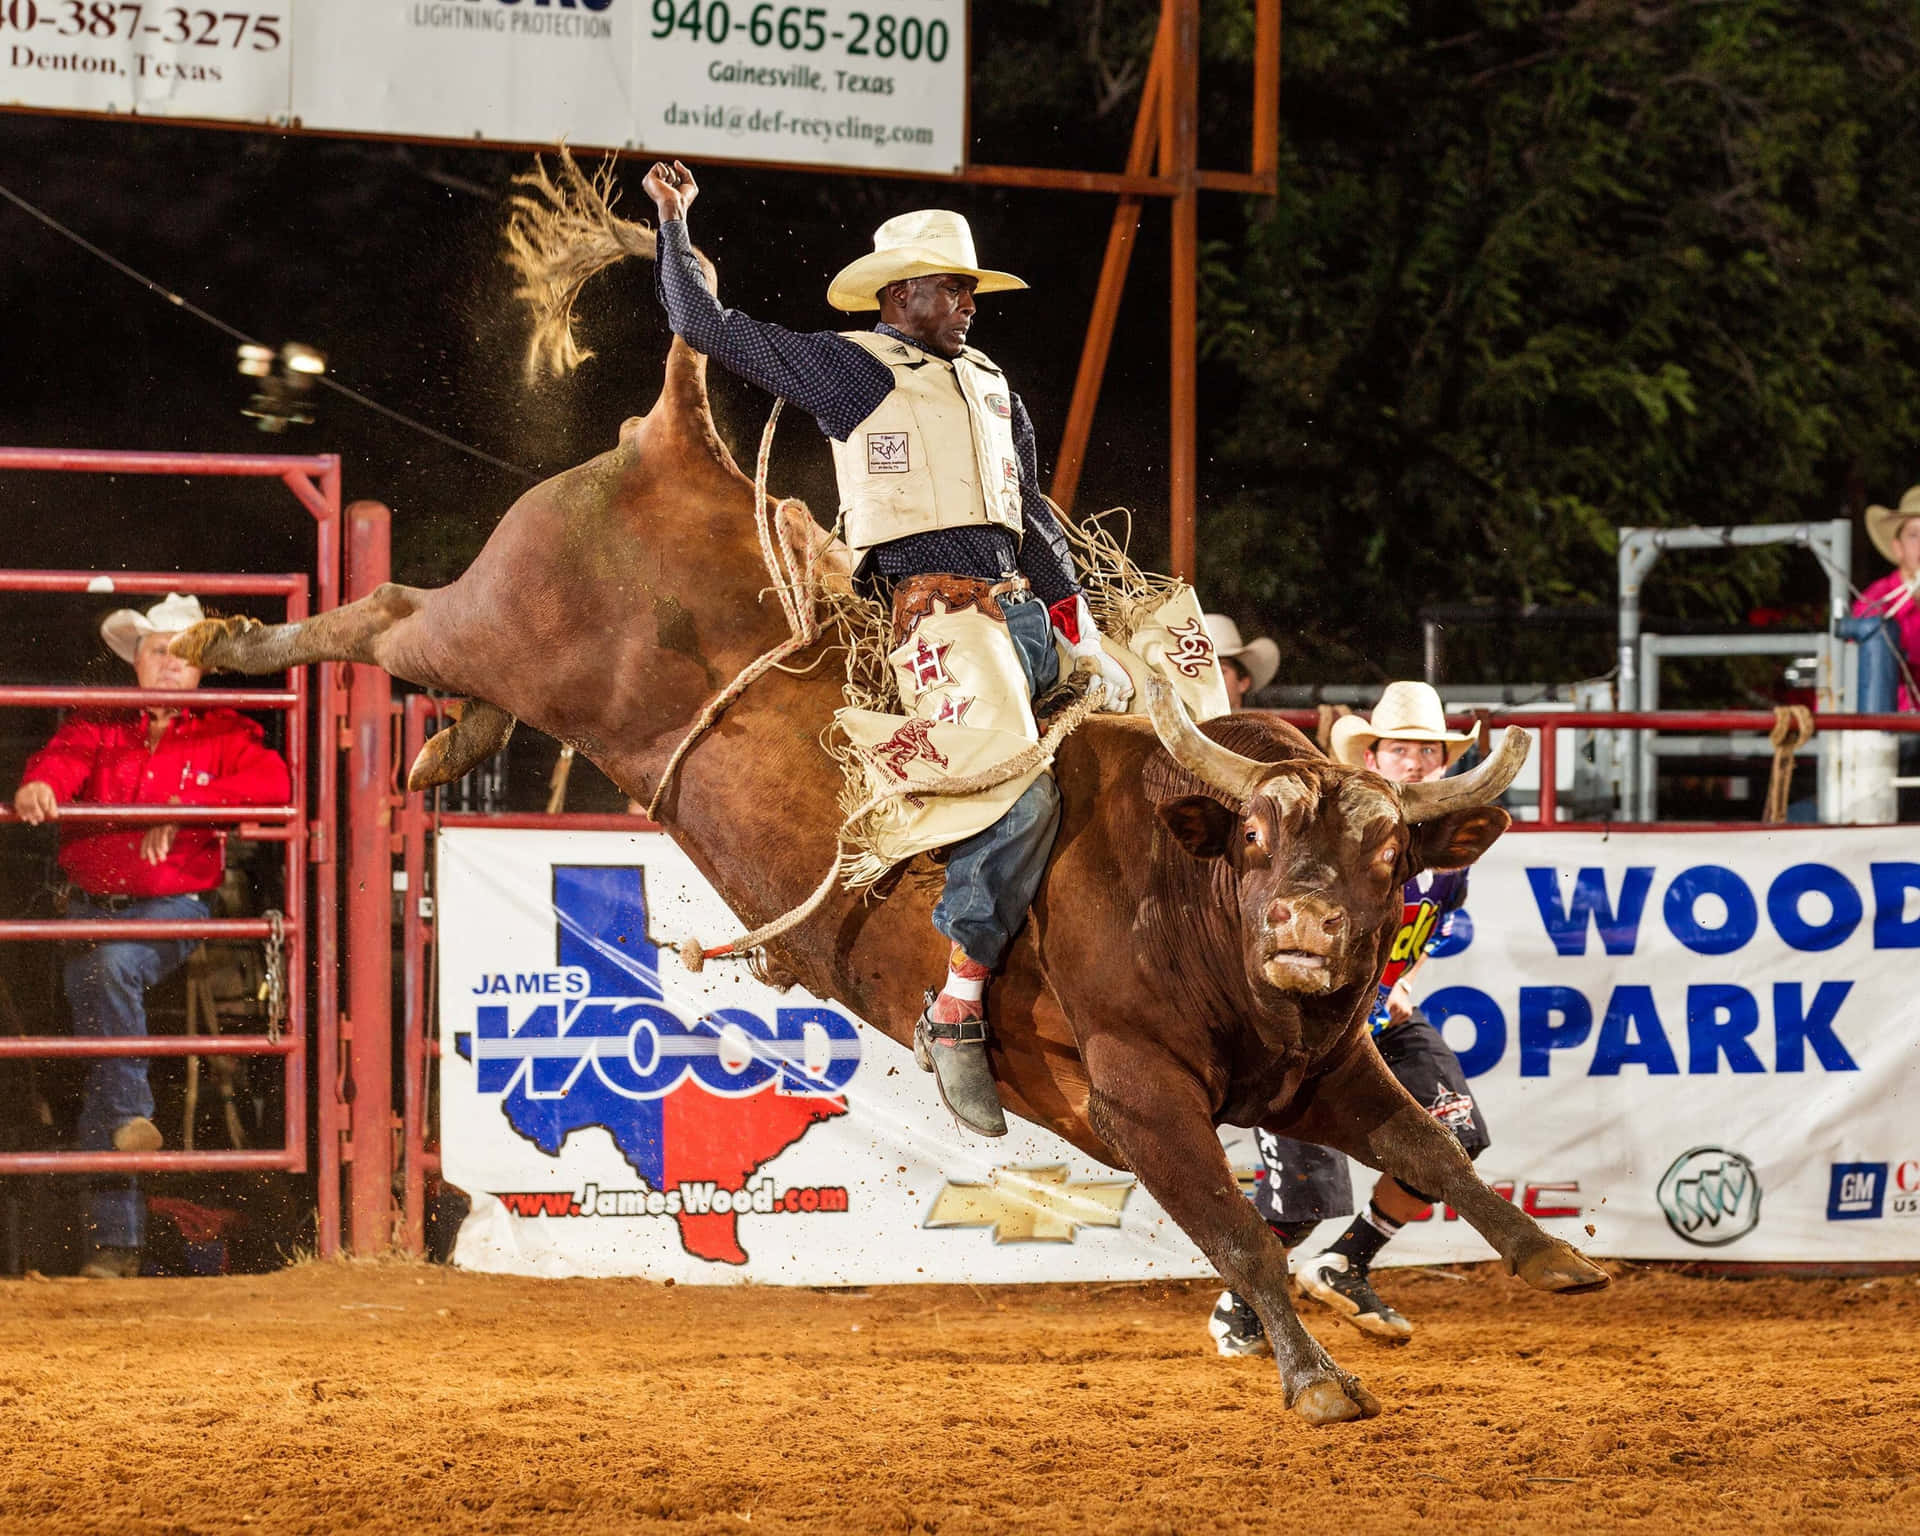 "Cowboy Courage: Professional Bull Rider Taking on a Challenge"